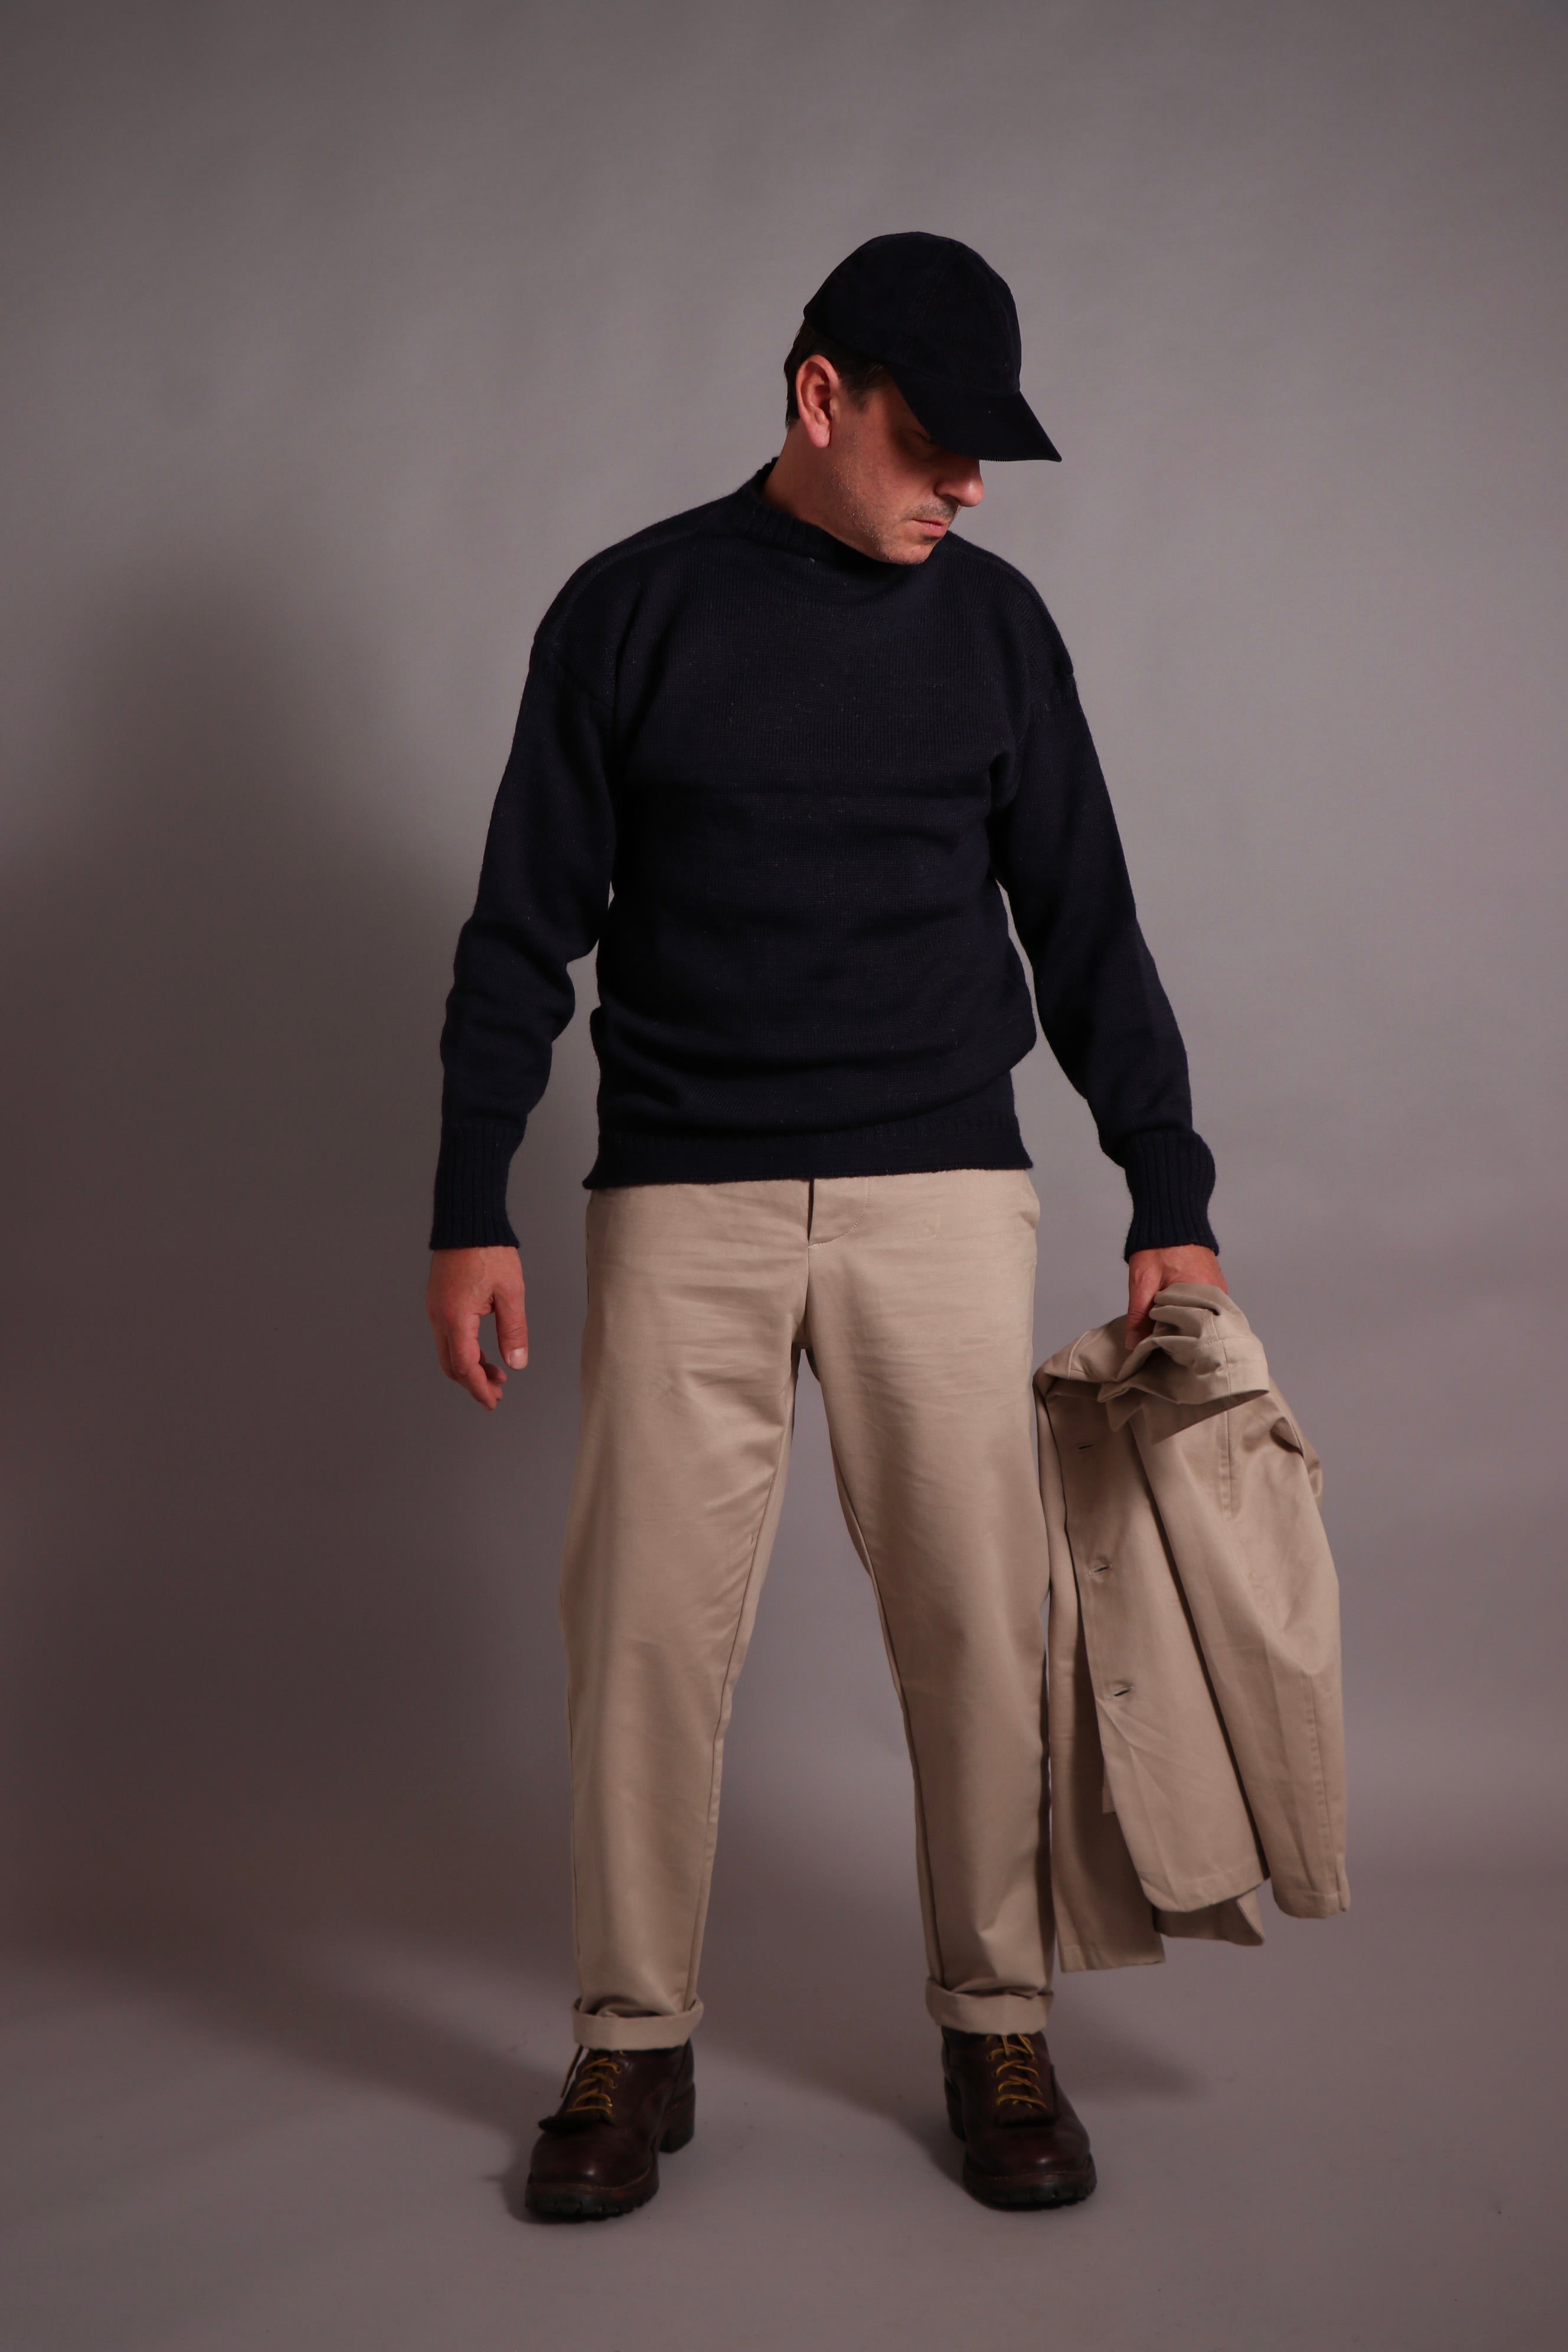 Enzo wears High Waist Trousers with Three Button Jacket and Le Tricoteur Guernsey